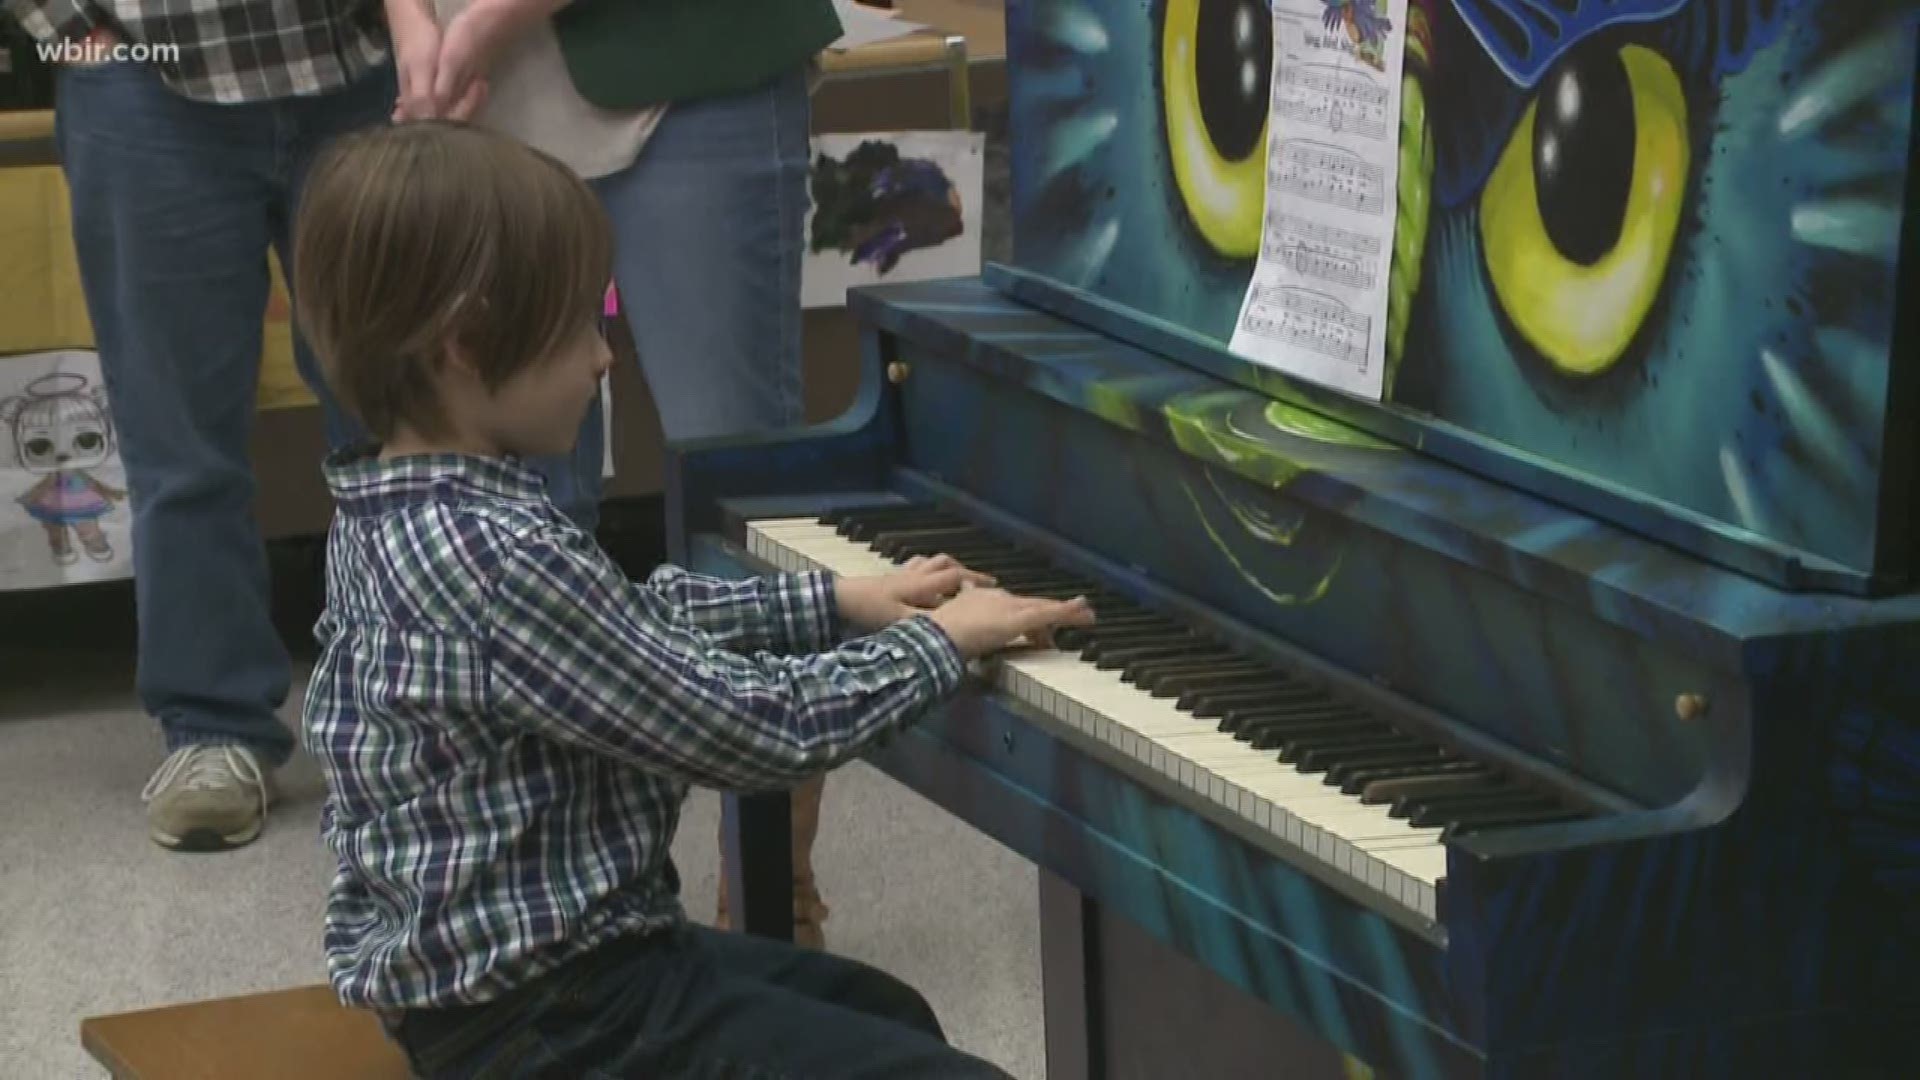 The Piano Project of Knoxville delivered one of their painted pianos to Dogwood Elementary for the students to enjoy, pianoprojectofknoxville.com. Nov. 25, 2019-4pm/